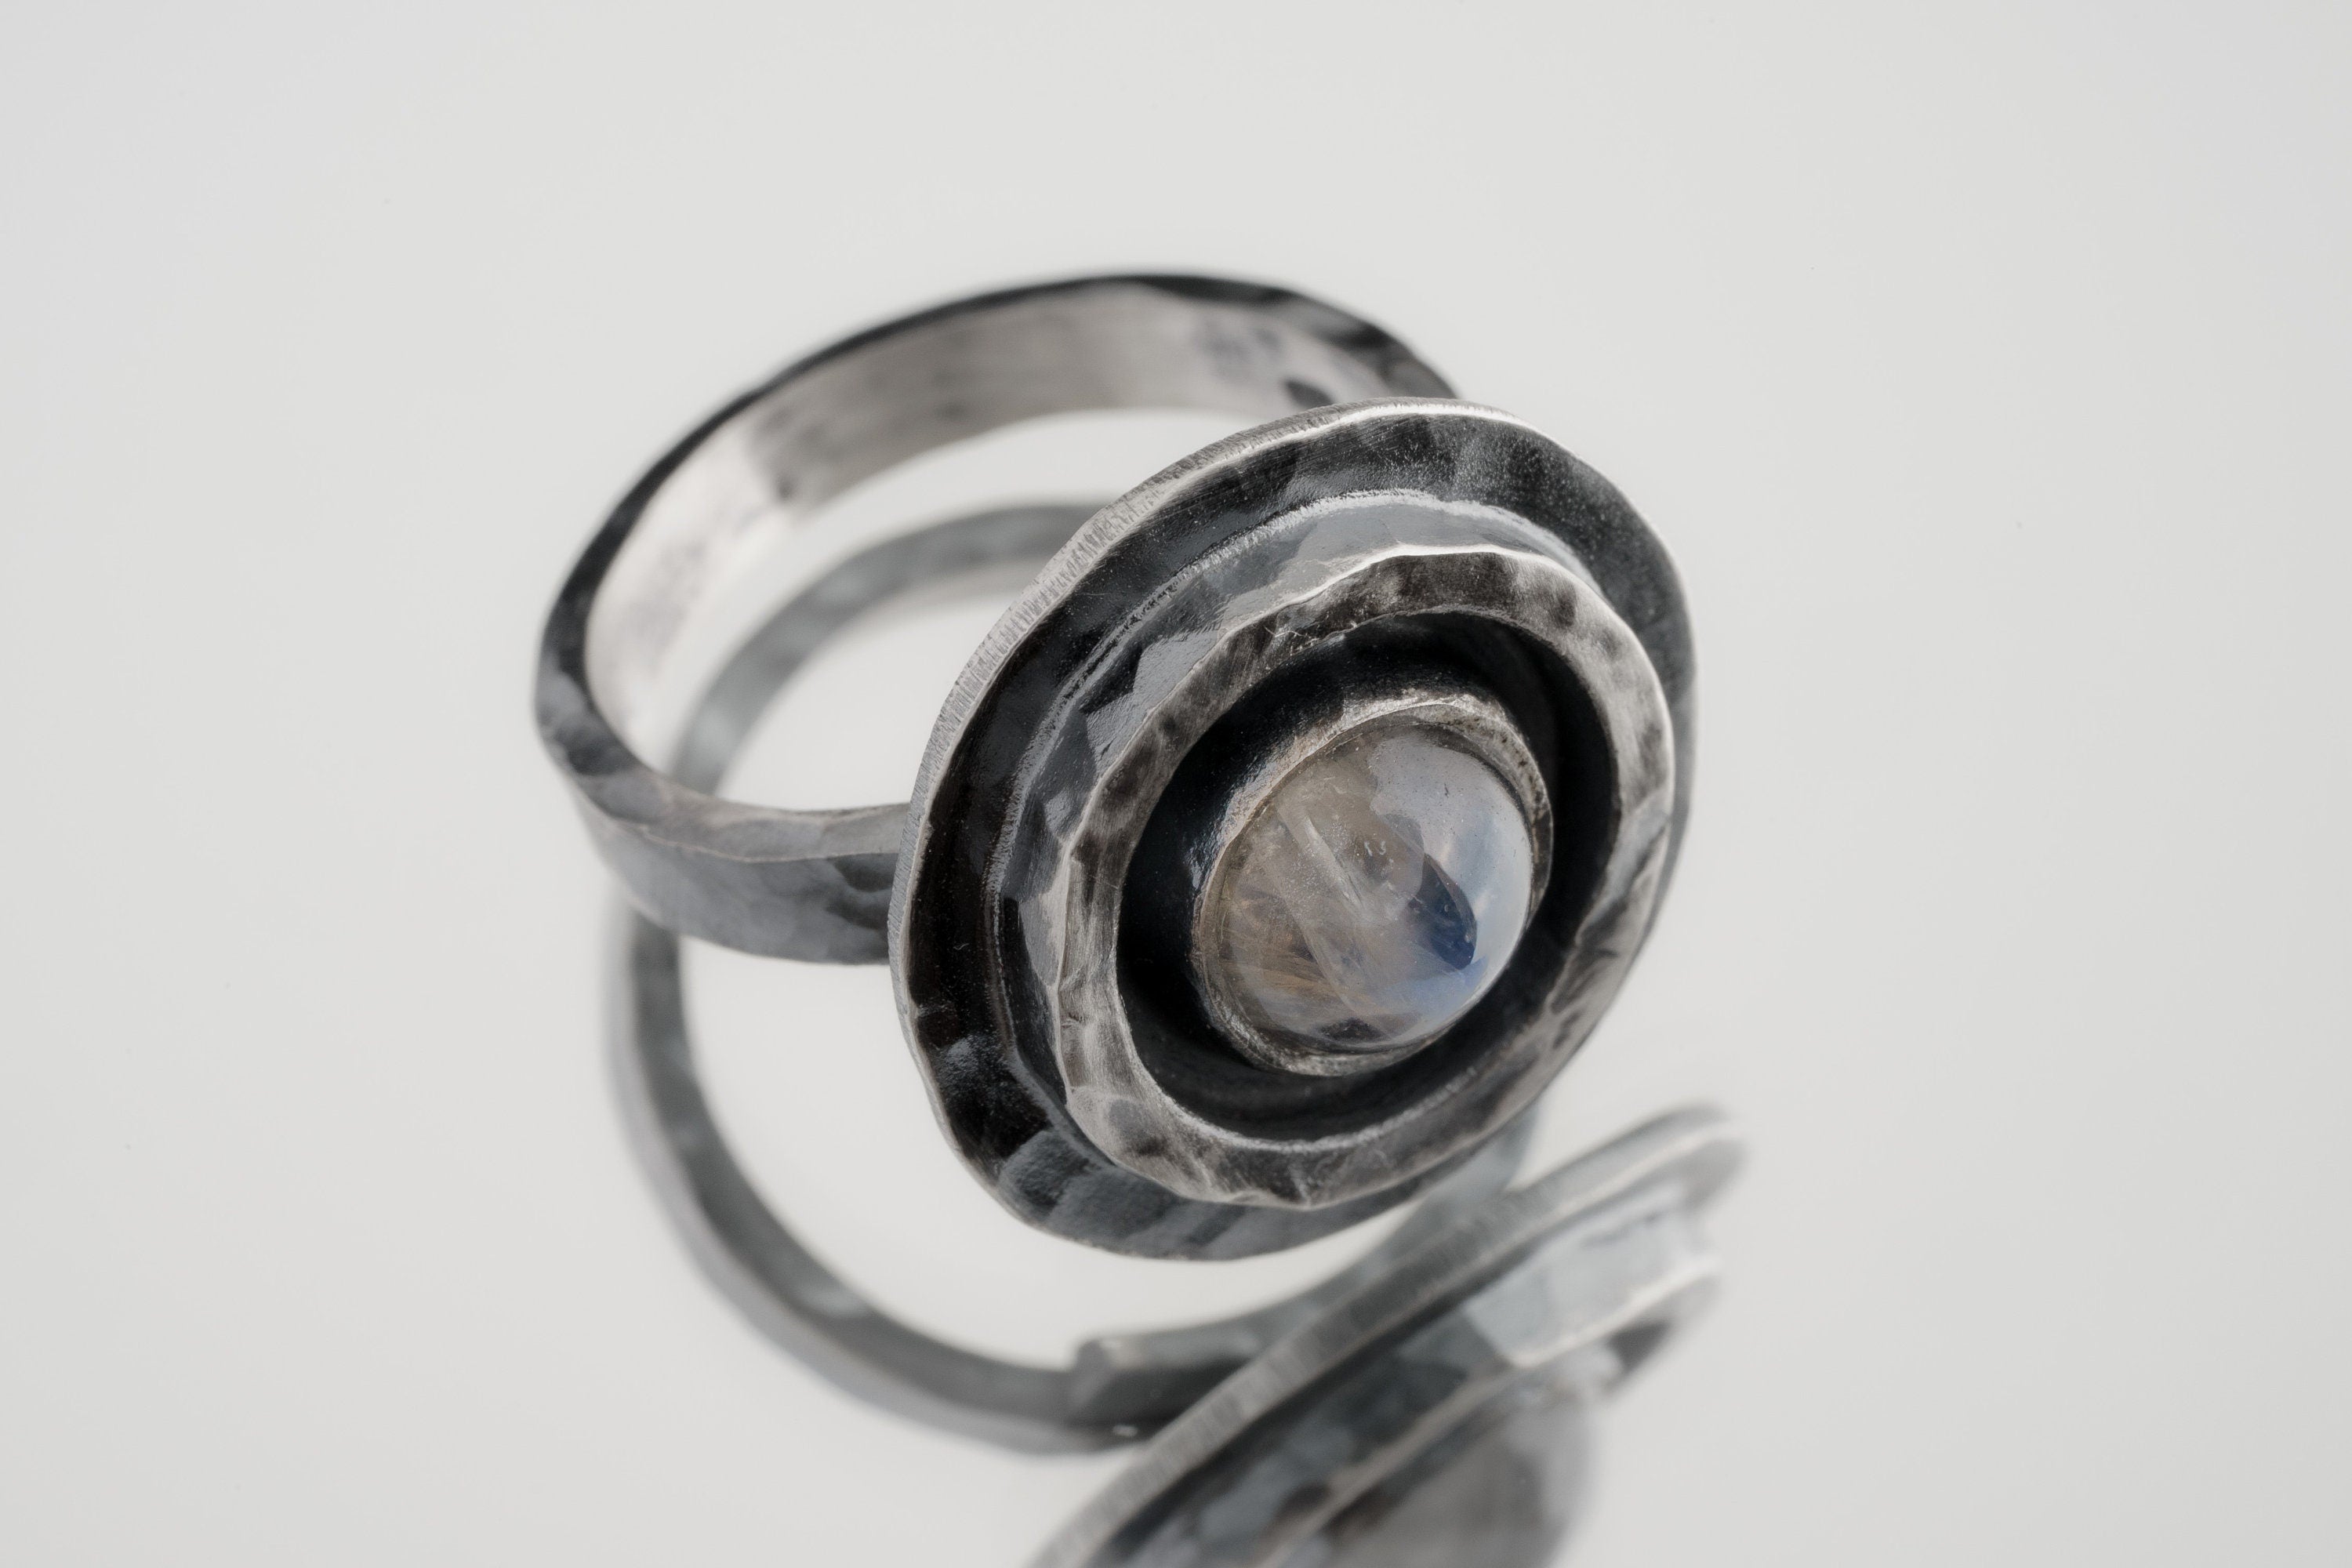 Blue Moonstone Dome Cab - Oxidised Rustick Boho Vibe - 925 Sterling Silver - Heavy Set Adjustable Textured Ring - Size 5-10 US